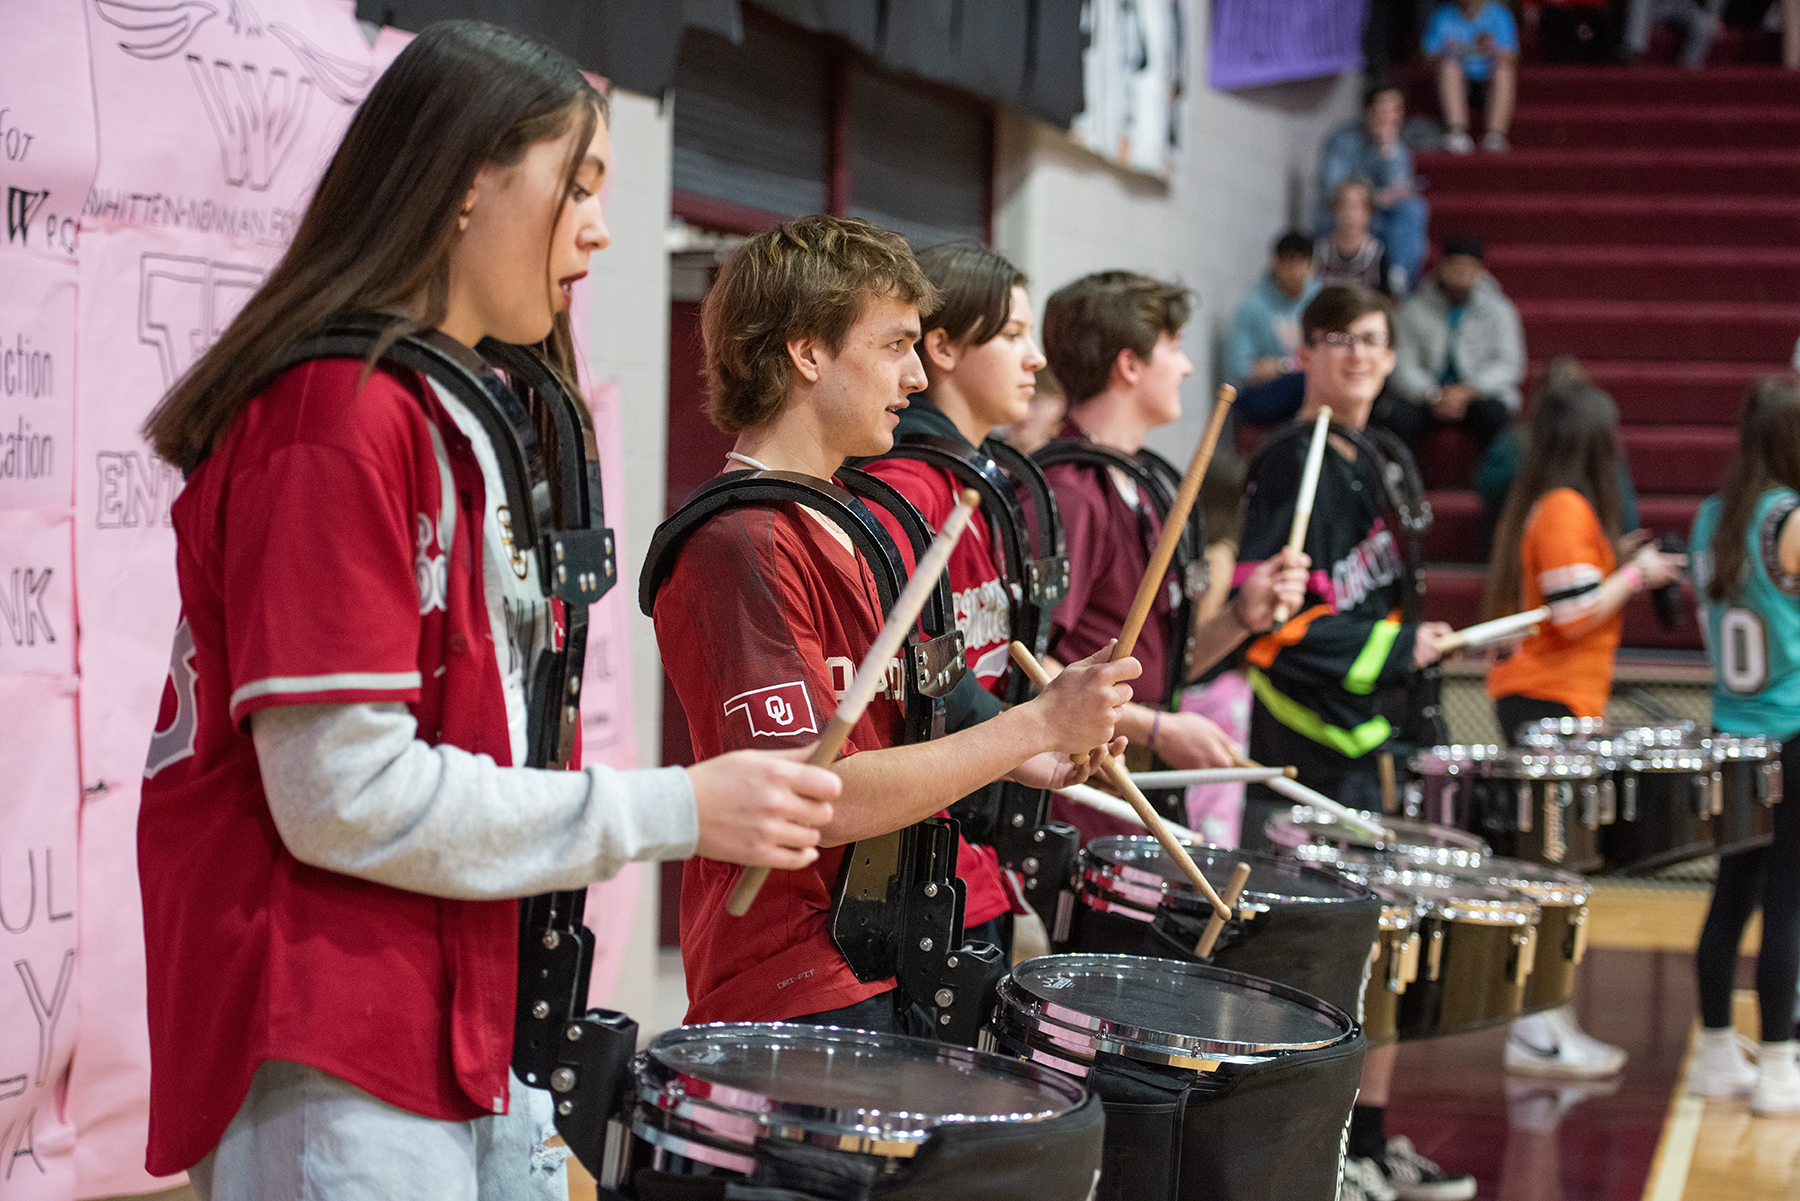 edmond memorial band members play during a swine week assembly